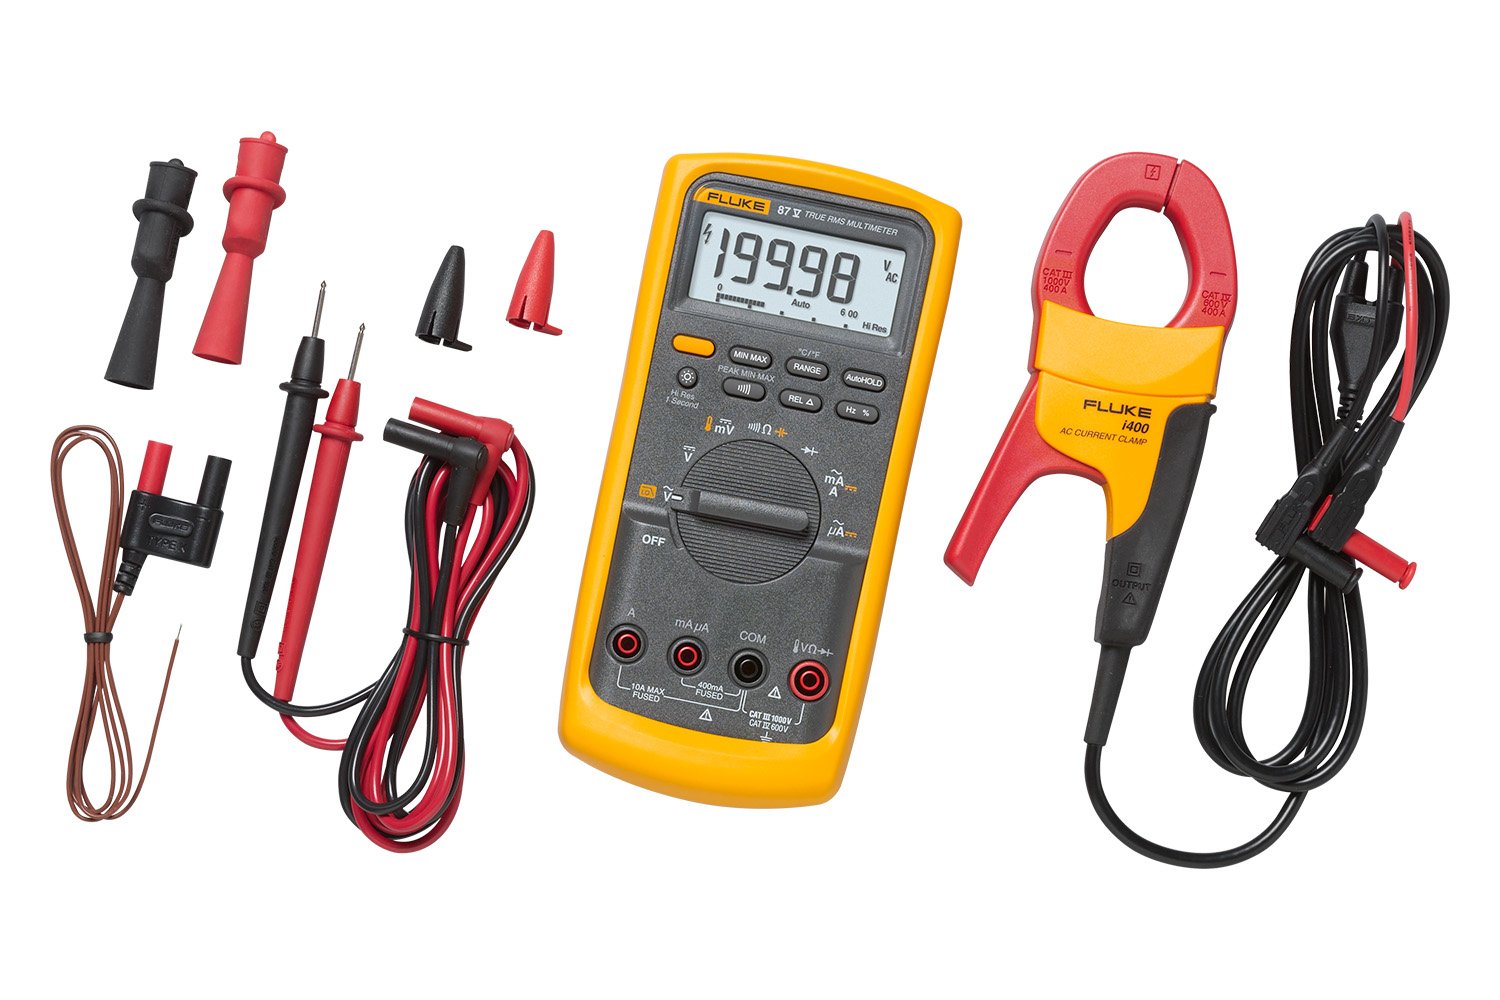 For Fluke Clamp Multimeter Cable Test Cable Probe Test Top Sale Duable 